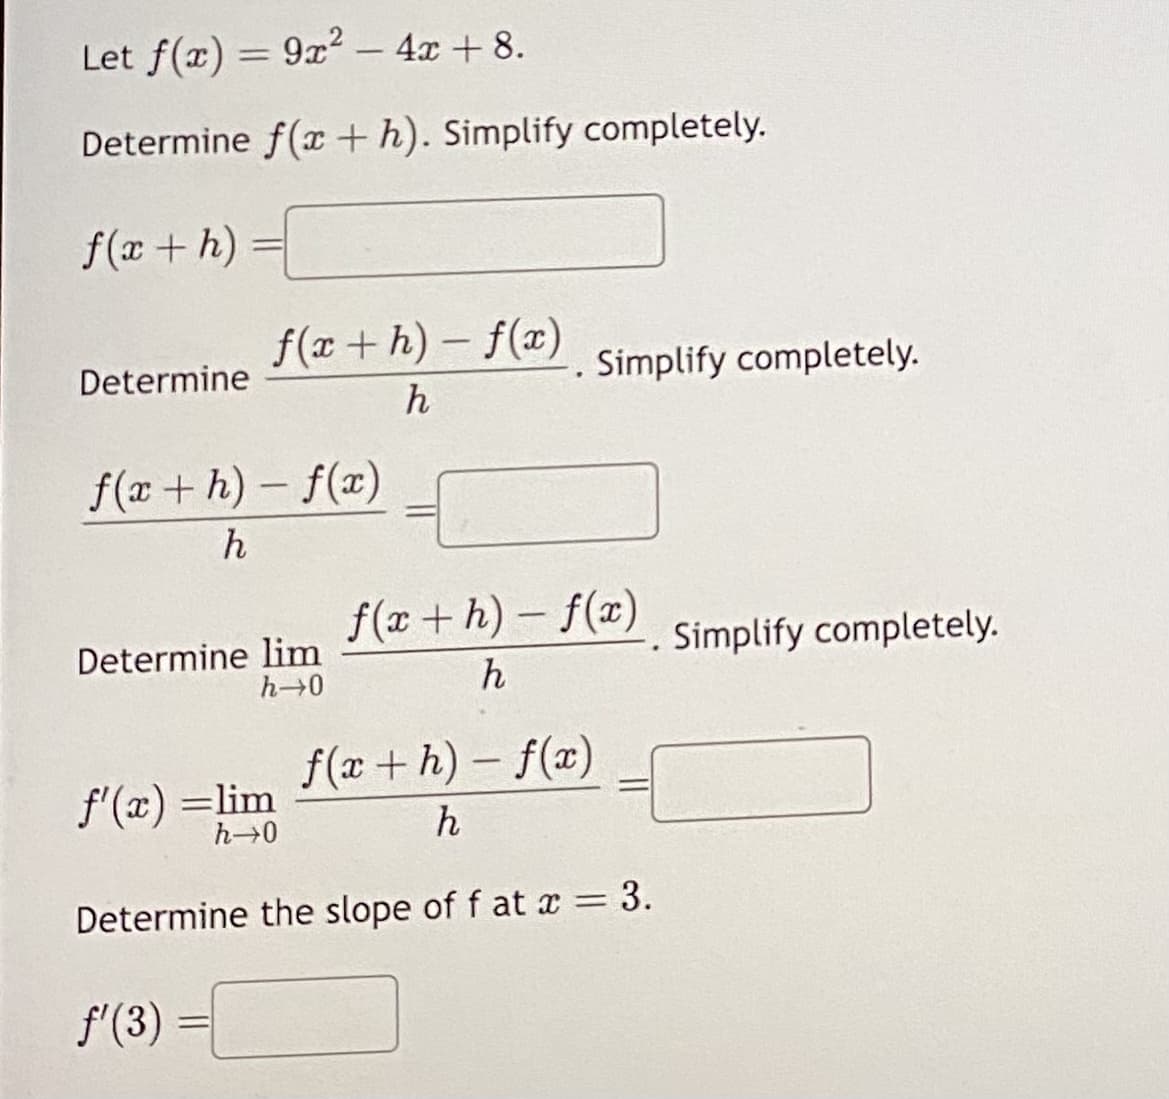 Let f(x) = 9x² - 4x + 8.
Determine f(a+h). Simplify completely.
f(x+h) =
Determine
f(x+h)-f(x)
h
f(x+h)-f(x)
h
Determine lim
h→0
f'(x) =lim
h→0
f'(3)
. Simplify completely.
f(x+h)-f(x)
h
Determine the slope of f at x = 3.
f(x+h)-f(x)
h
.
Simplify completely.